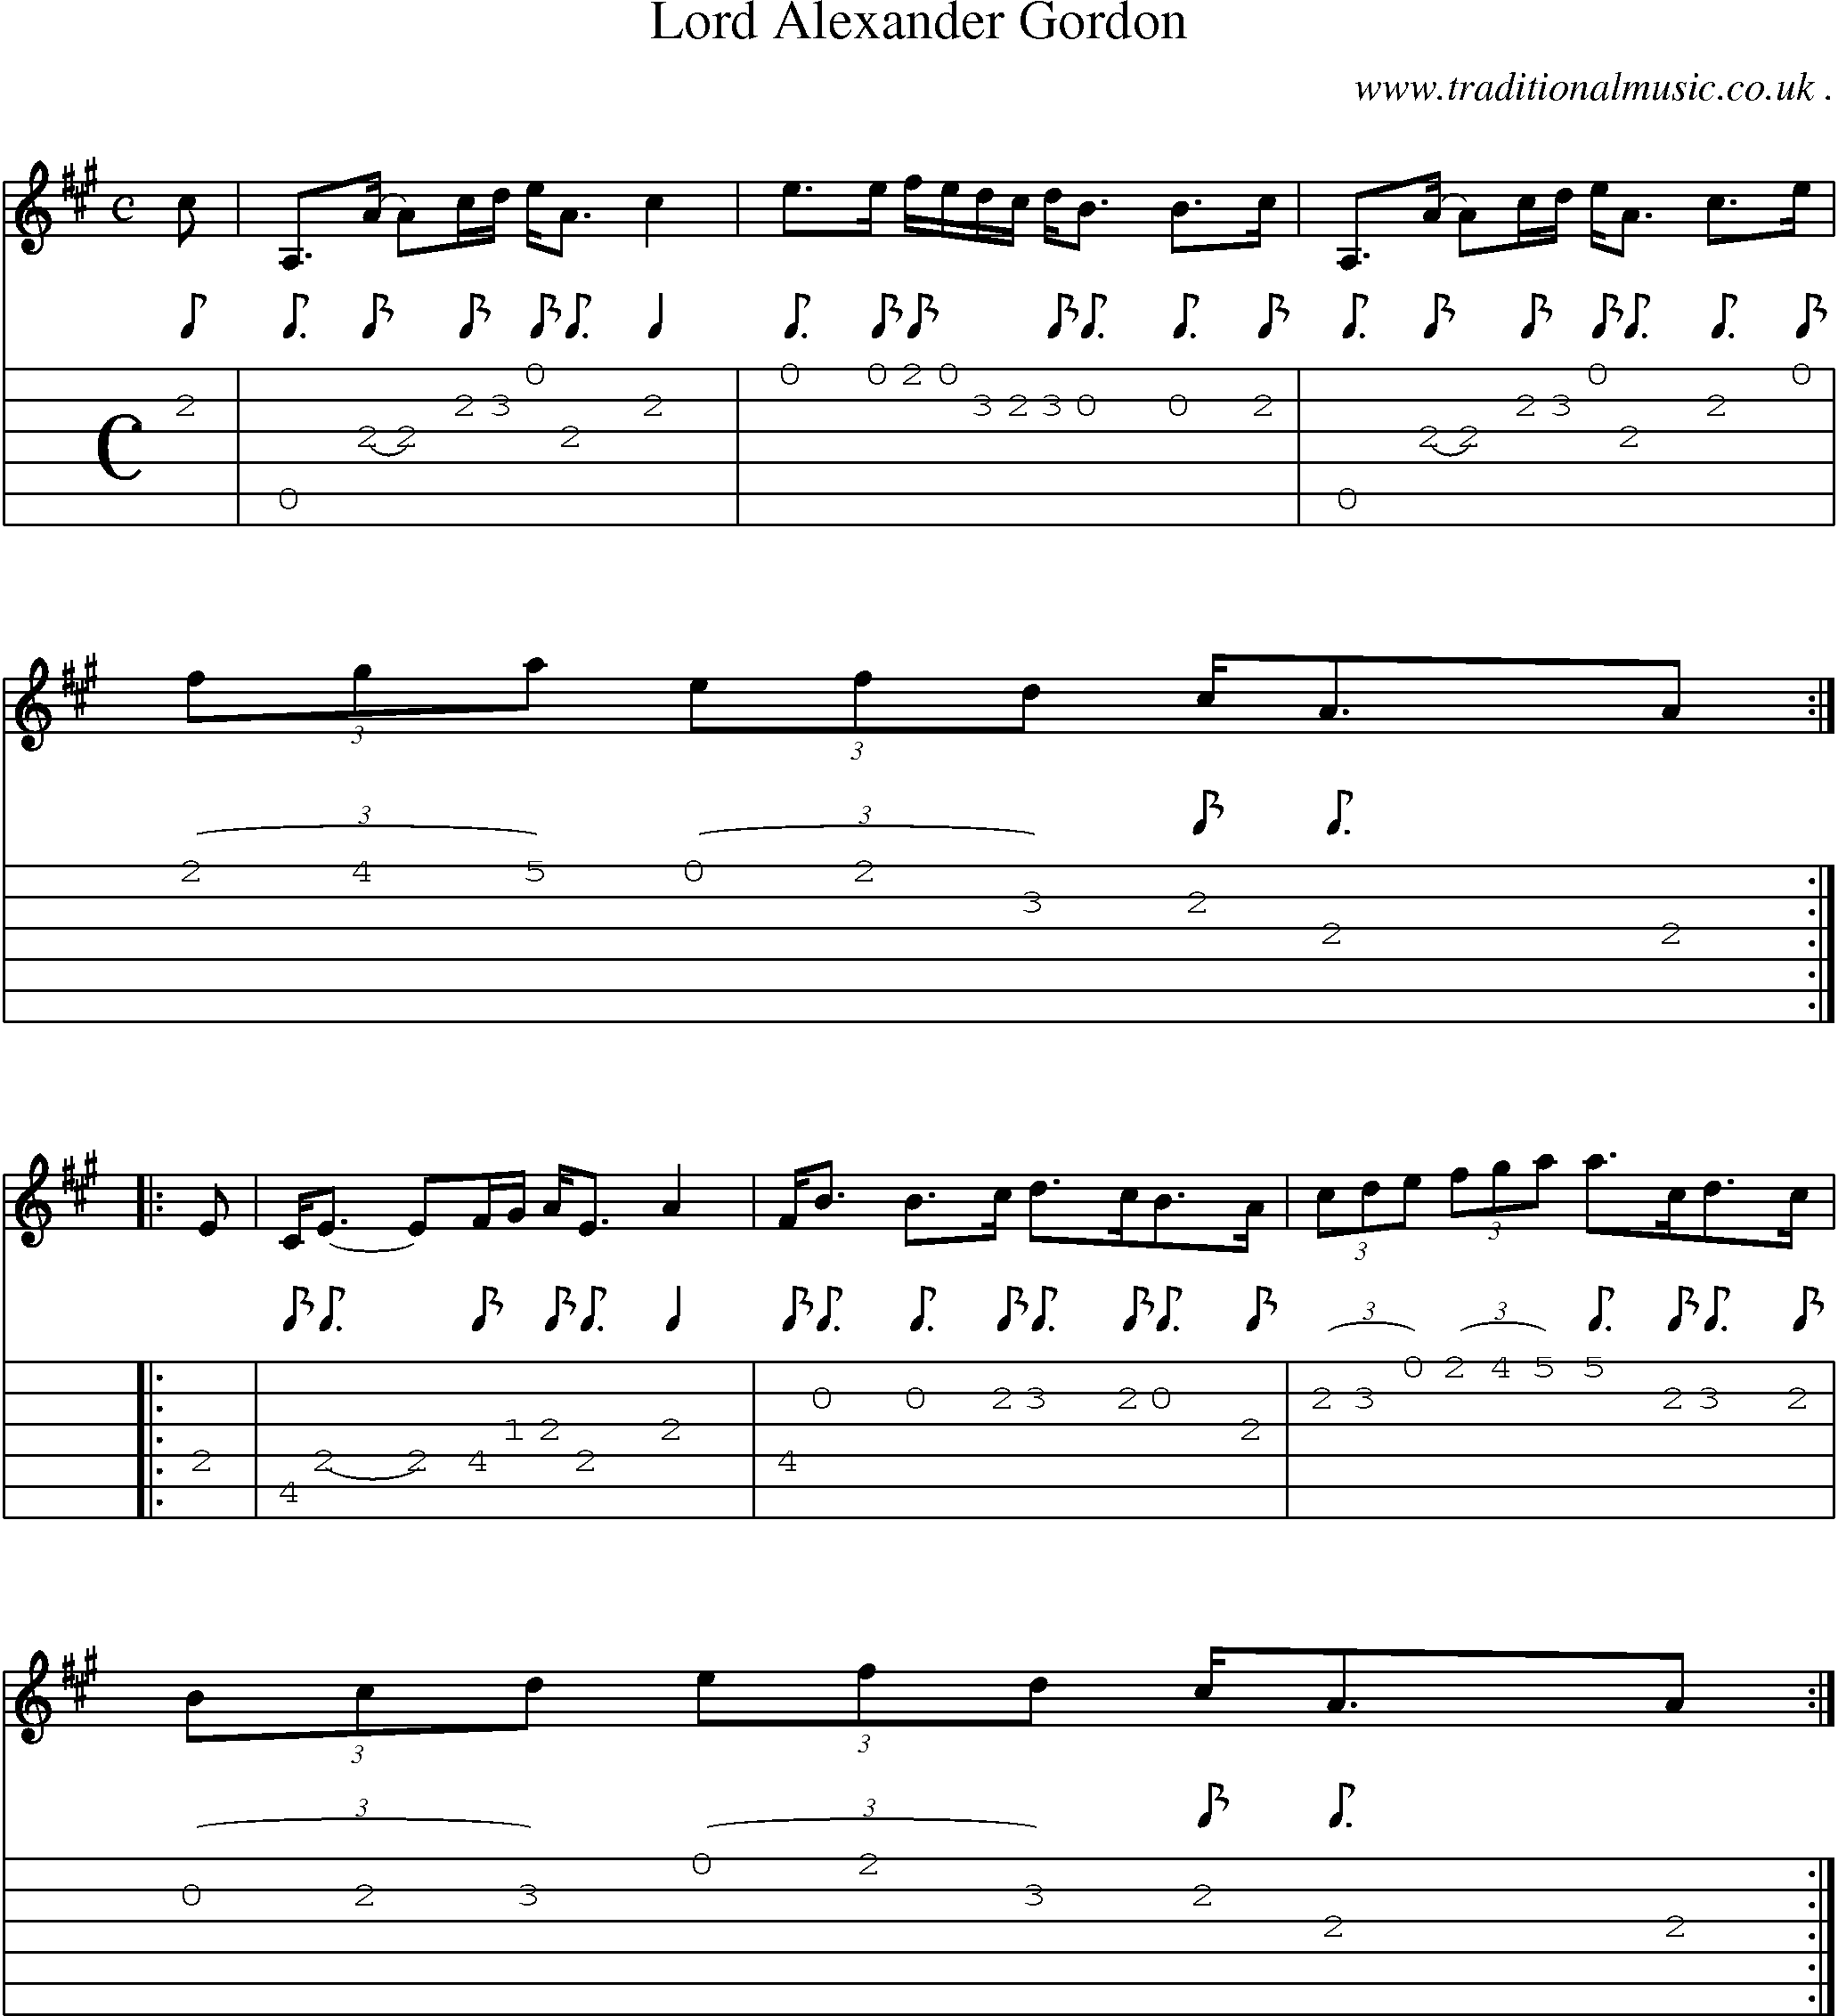 Sheet-music  score, Chords and Guitar Tabs for Lord Alexander Gordon